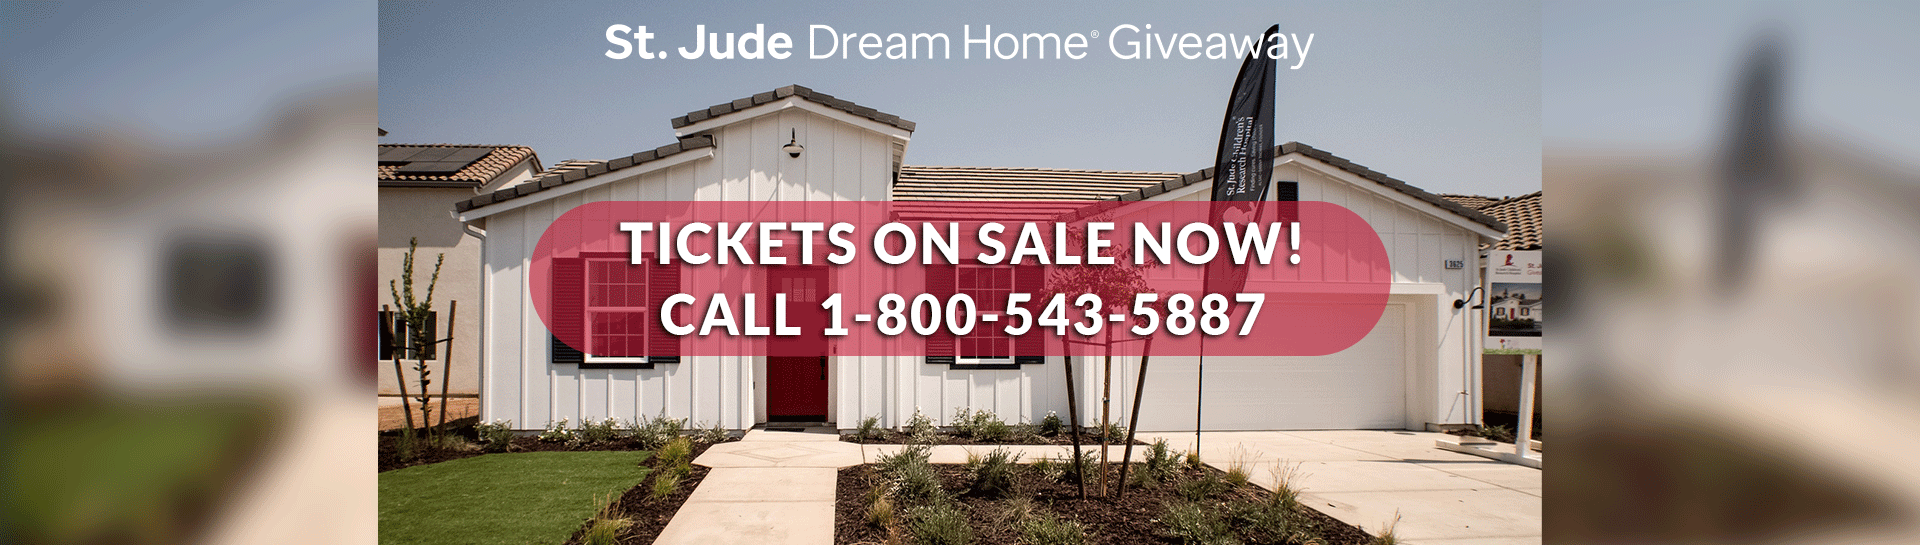 Tickets Now Available For The 2021 St. Jude Dream Home! The Earlier You Reserve The More Prizes You Can Win!